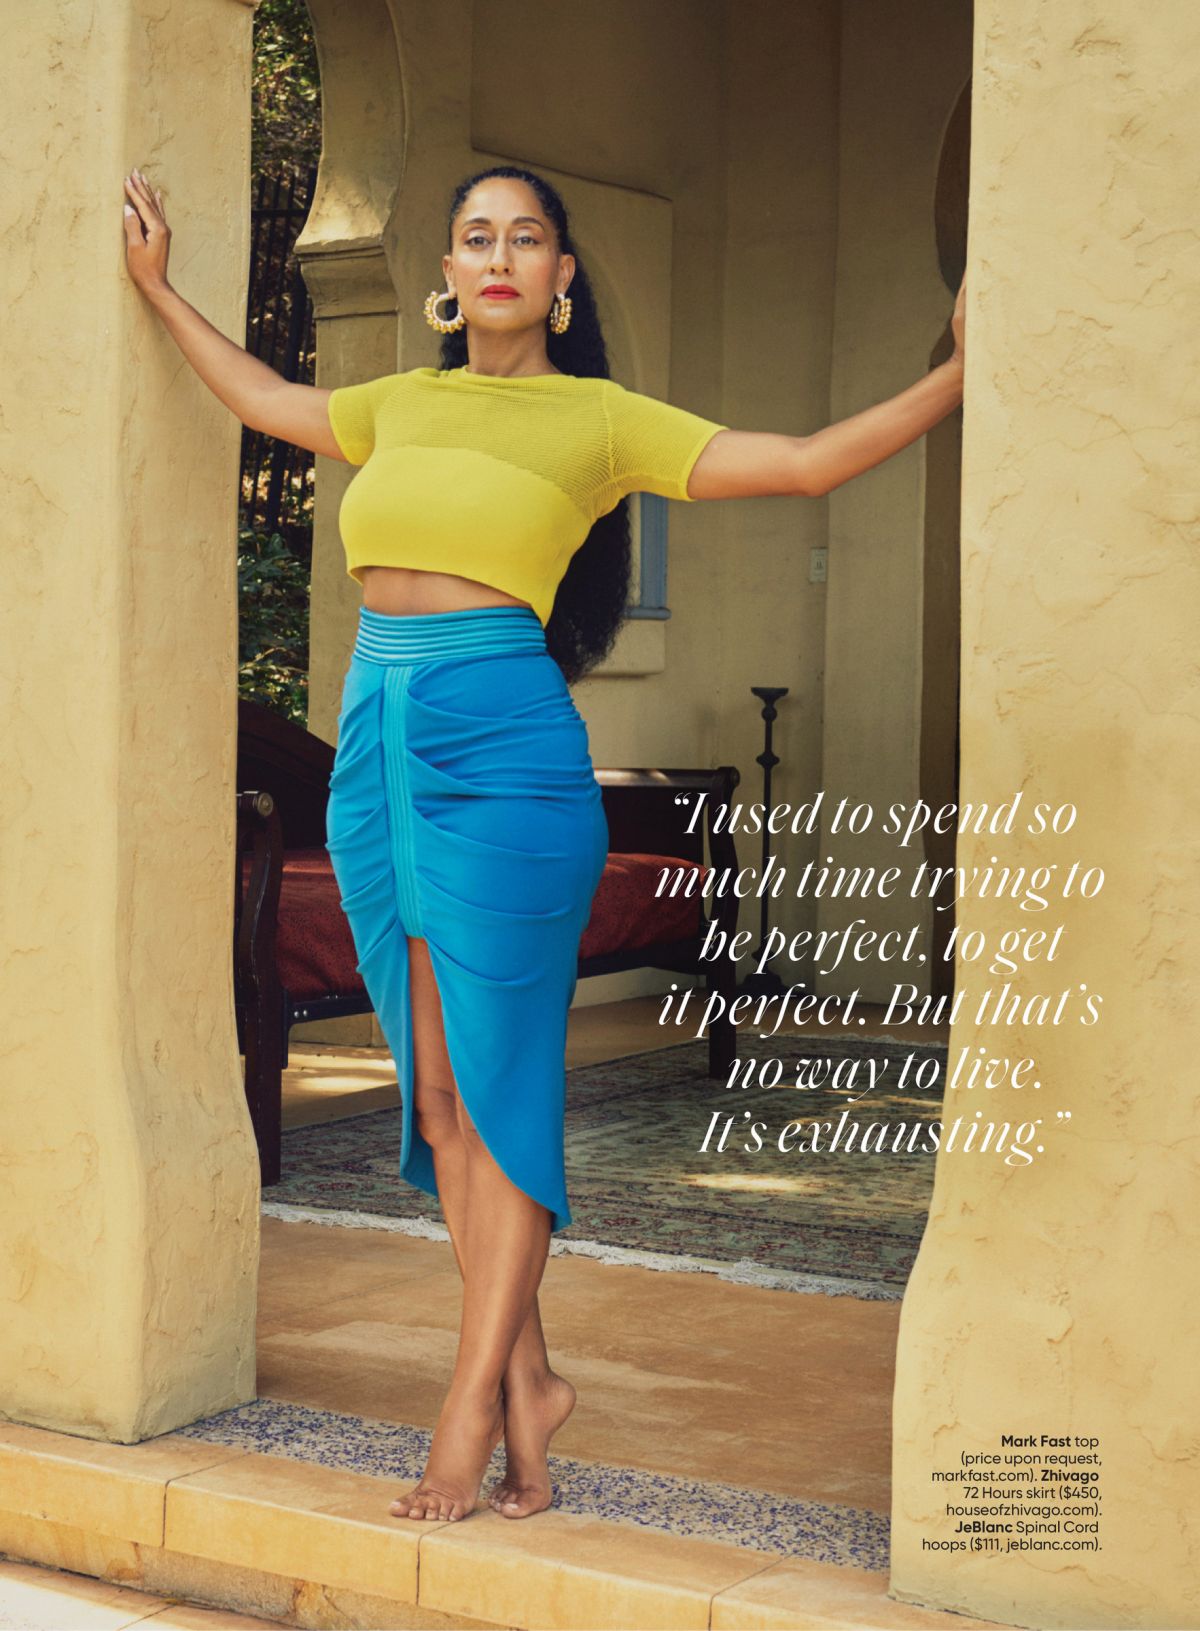 Tracee Ellis Ross Featured in Shape Magazine - November 2020